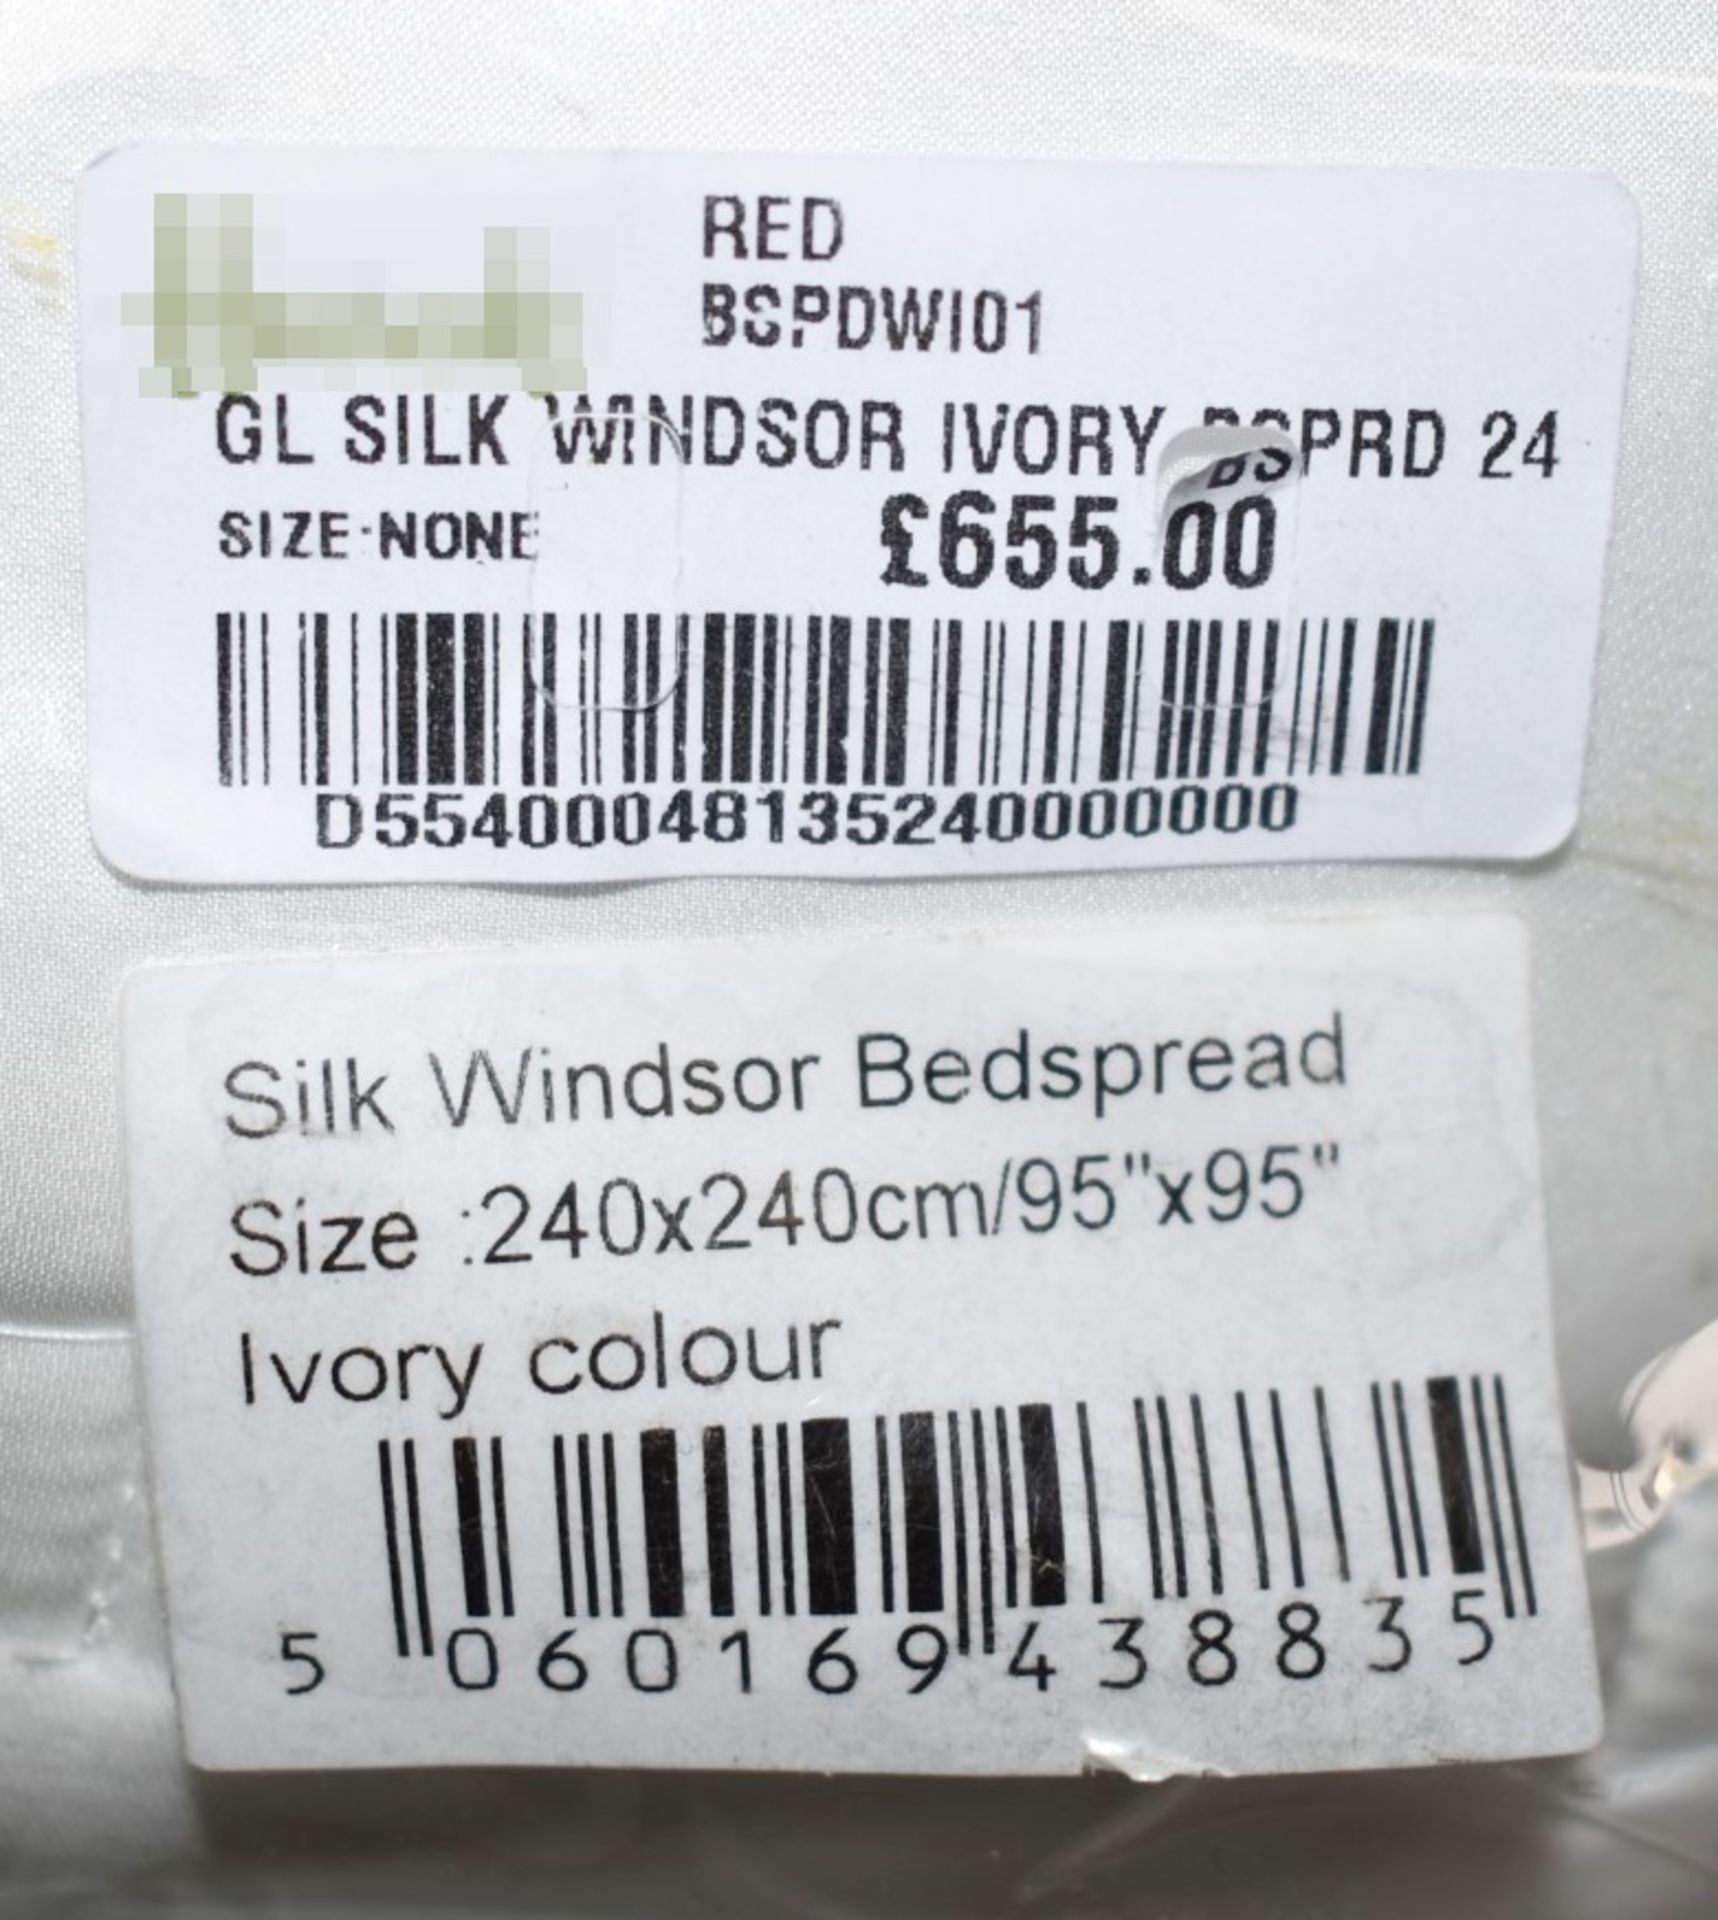 1 x GINGERLILY 'Windsor' Luxury Mulberry Silk Double Bedspread, in Ivory 240cm x 240cm - RRP £655.00 - Image 3 of 6